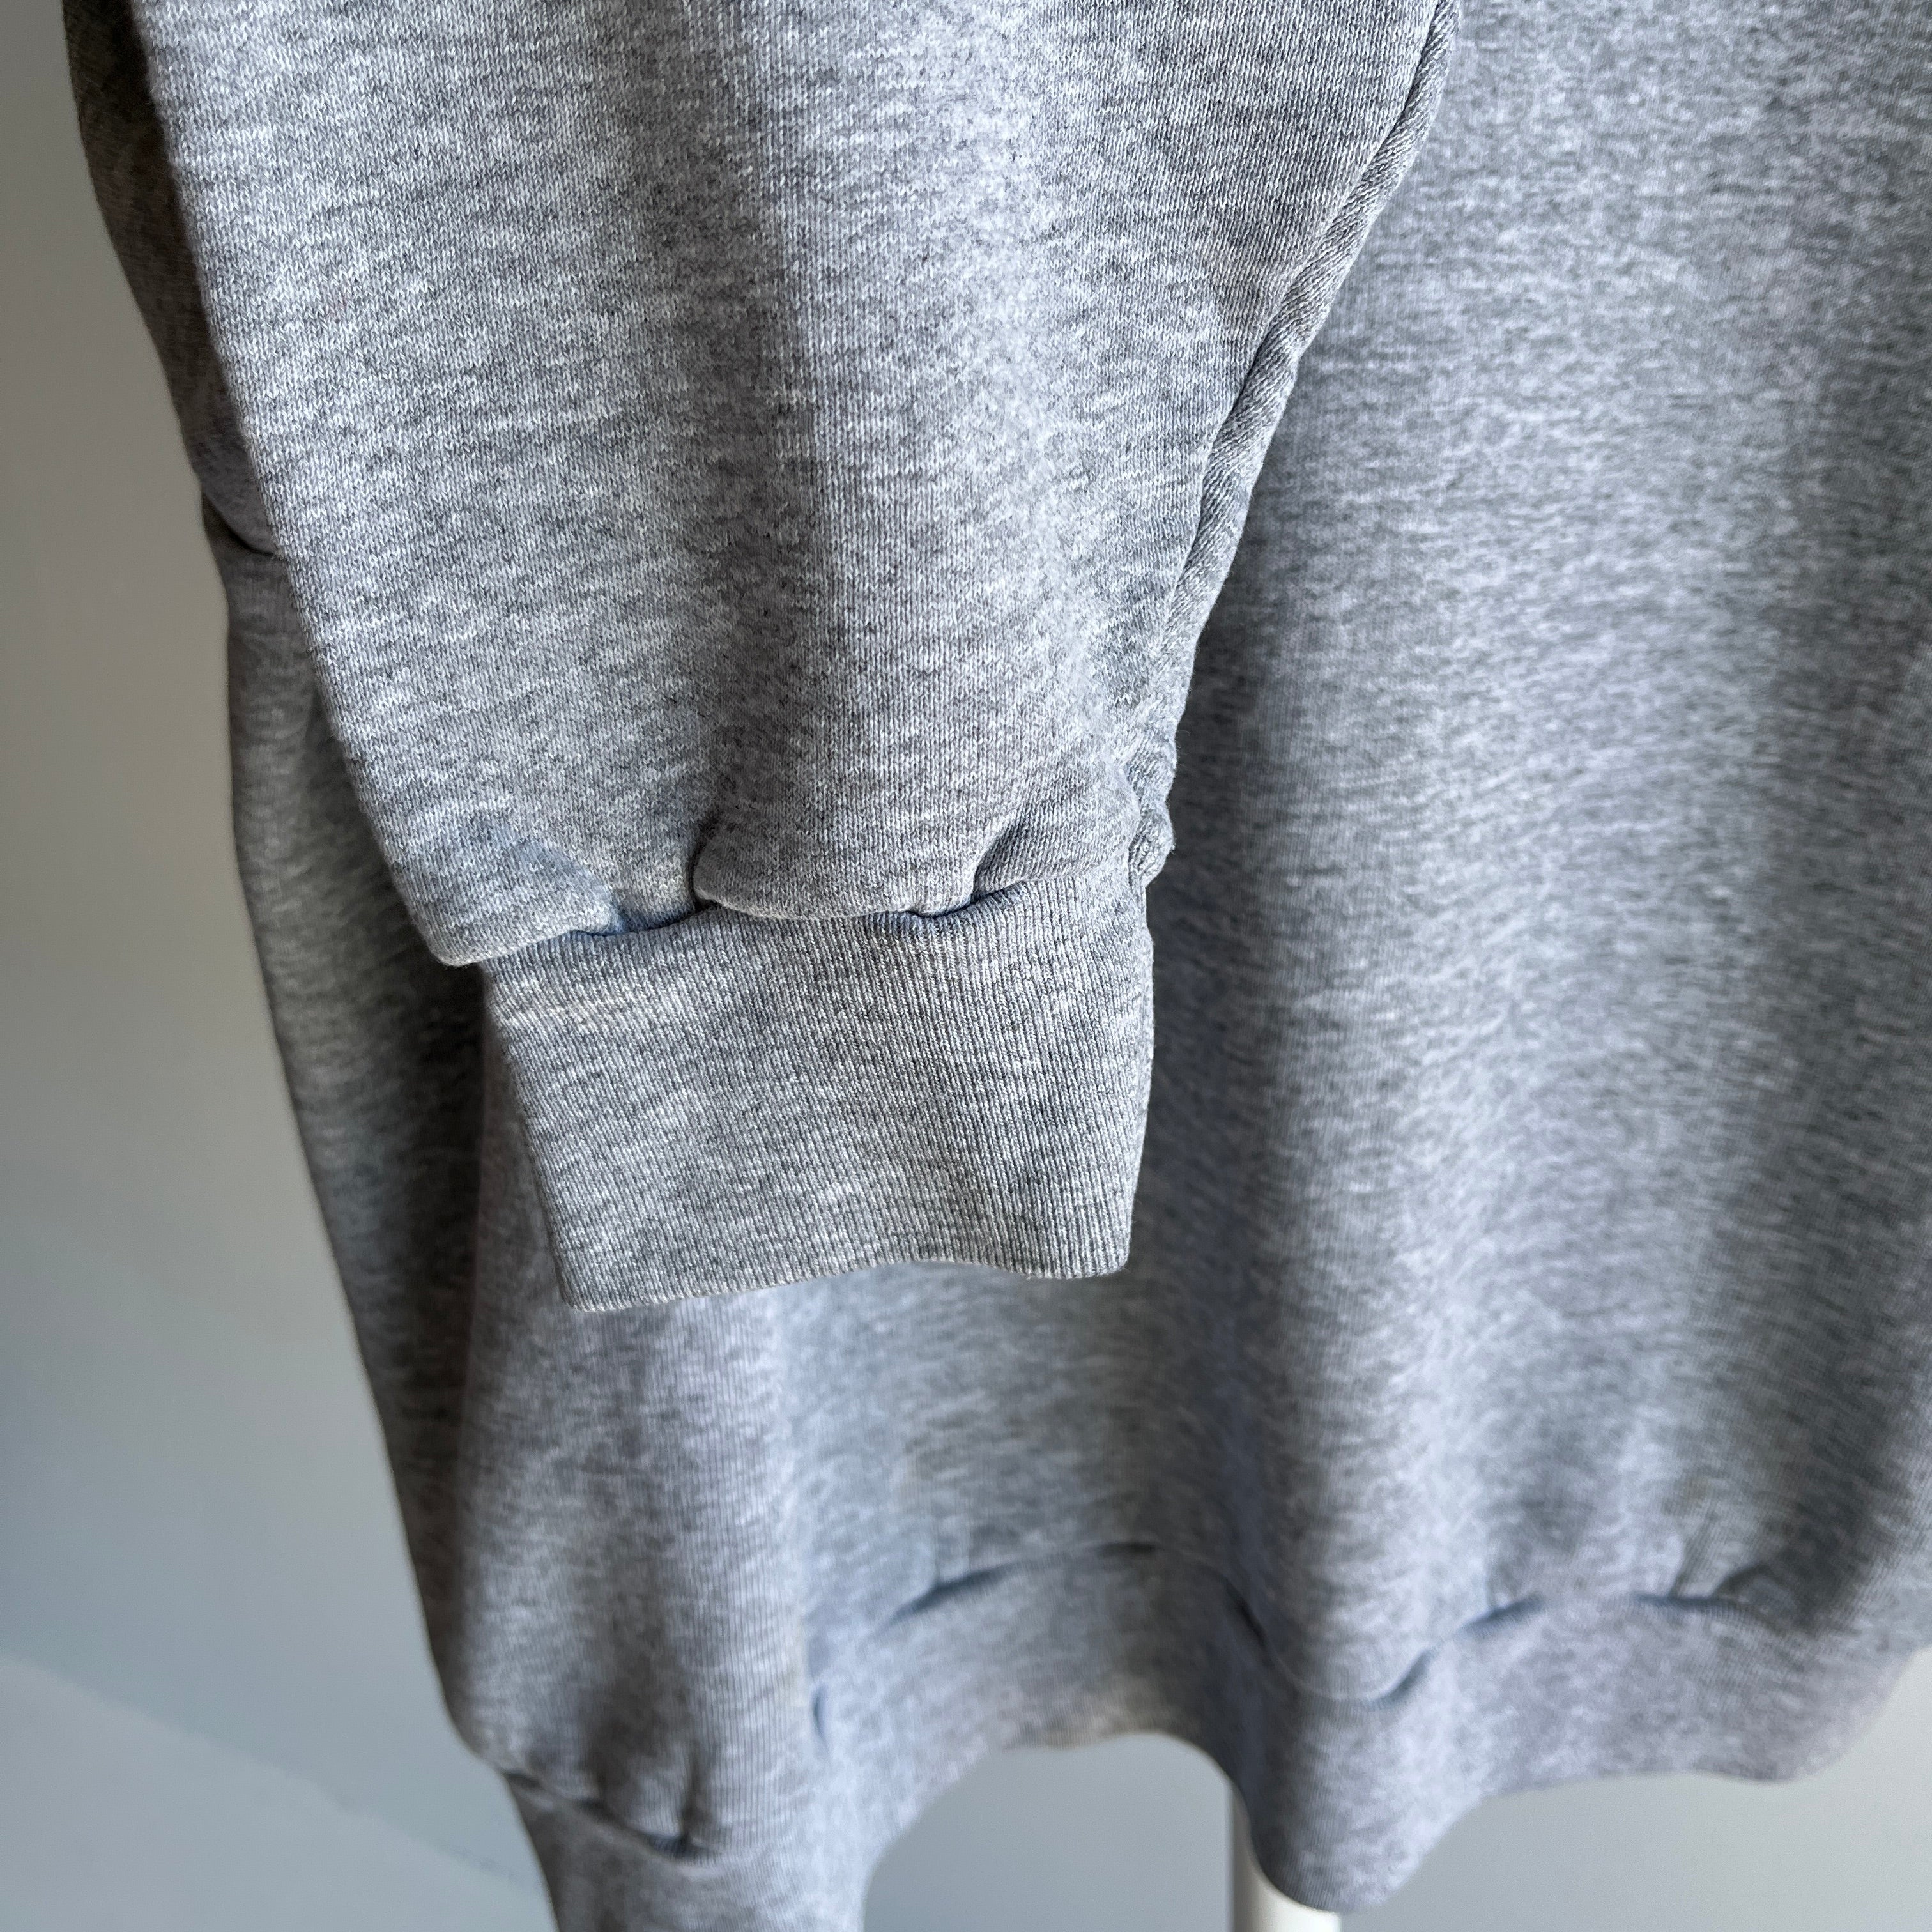 1980/90s Blank Gray Sweatshirt with Contrast White Stitching